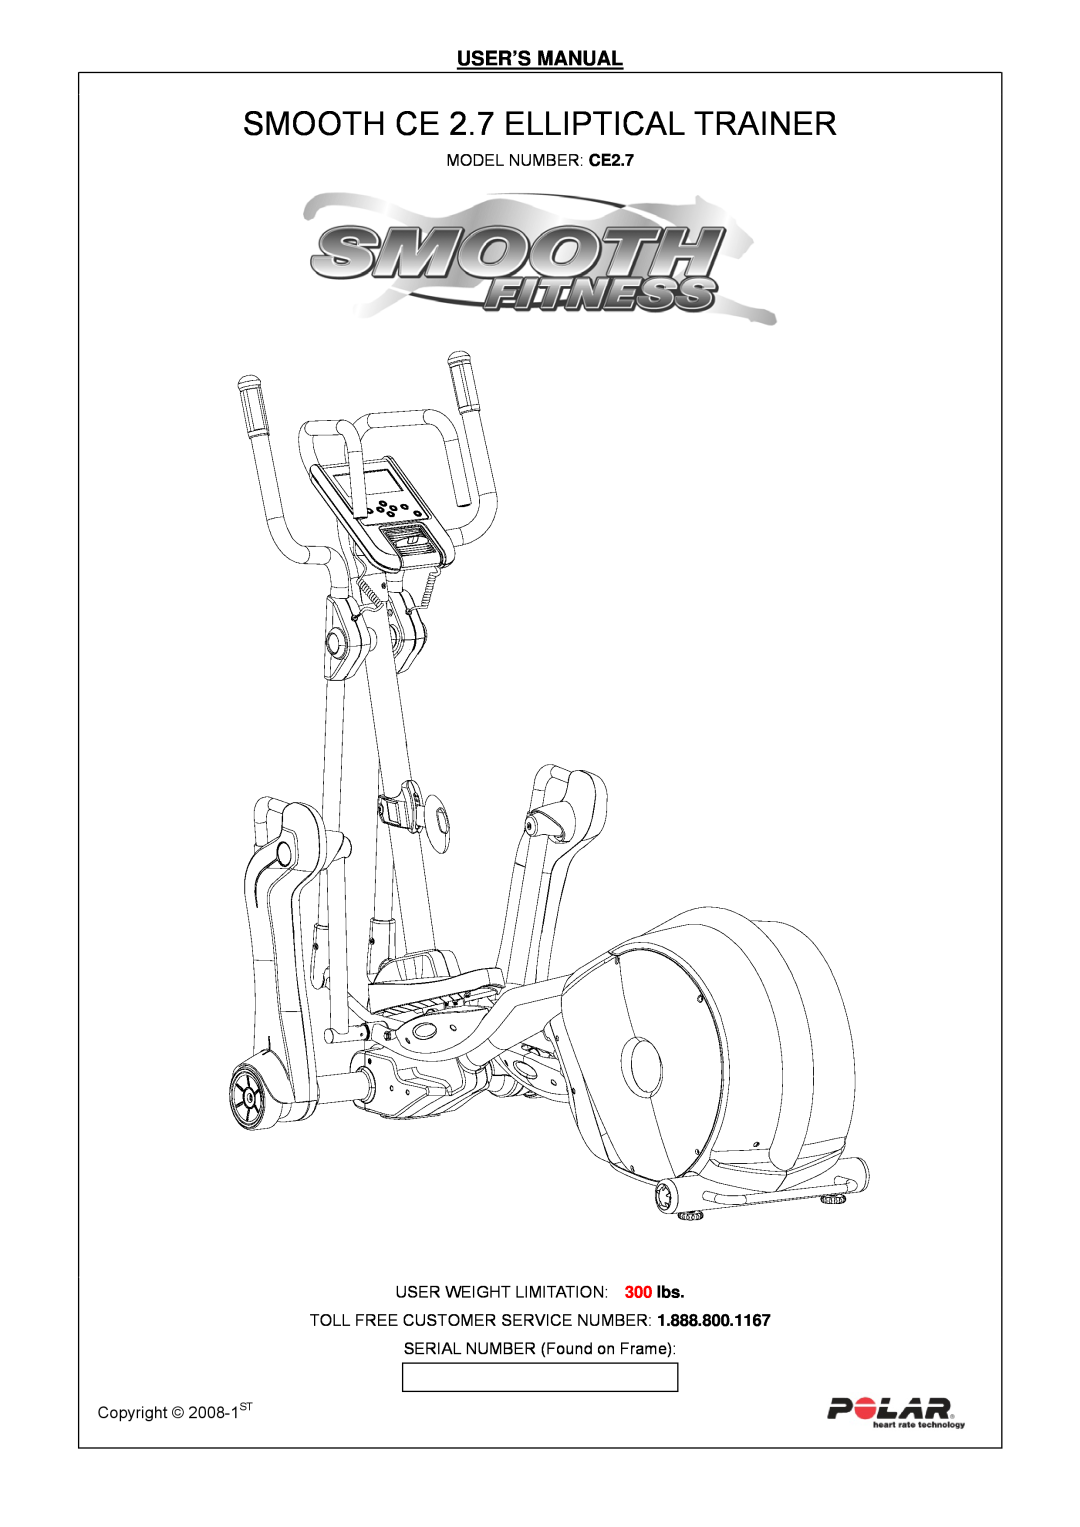 Polar user manual User’S Manual, SMOOTH CE 2.7 ELLIPTICAL TRAINER, MODEL NUMBER CE2.7 USER WEIGHT LIMITATION 300 lbs 